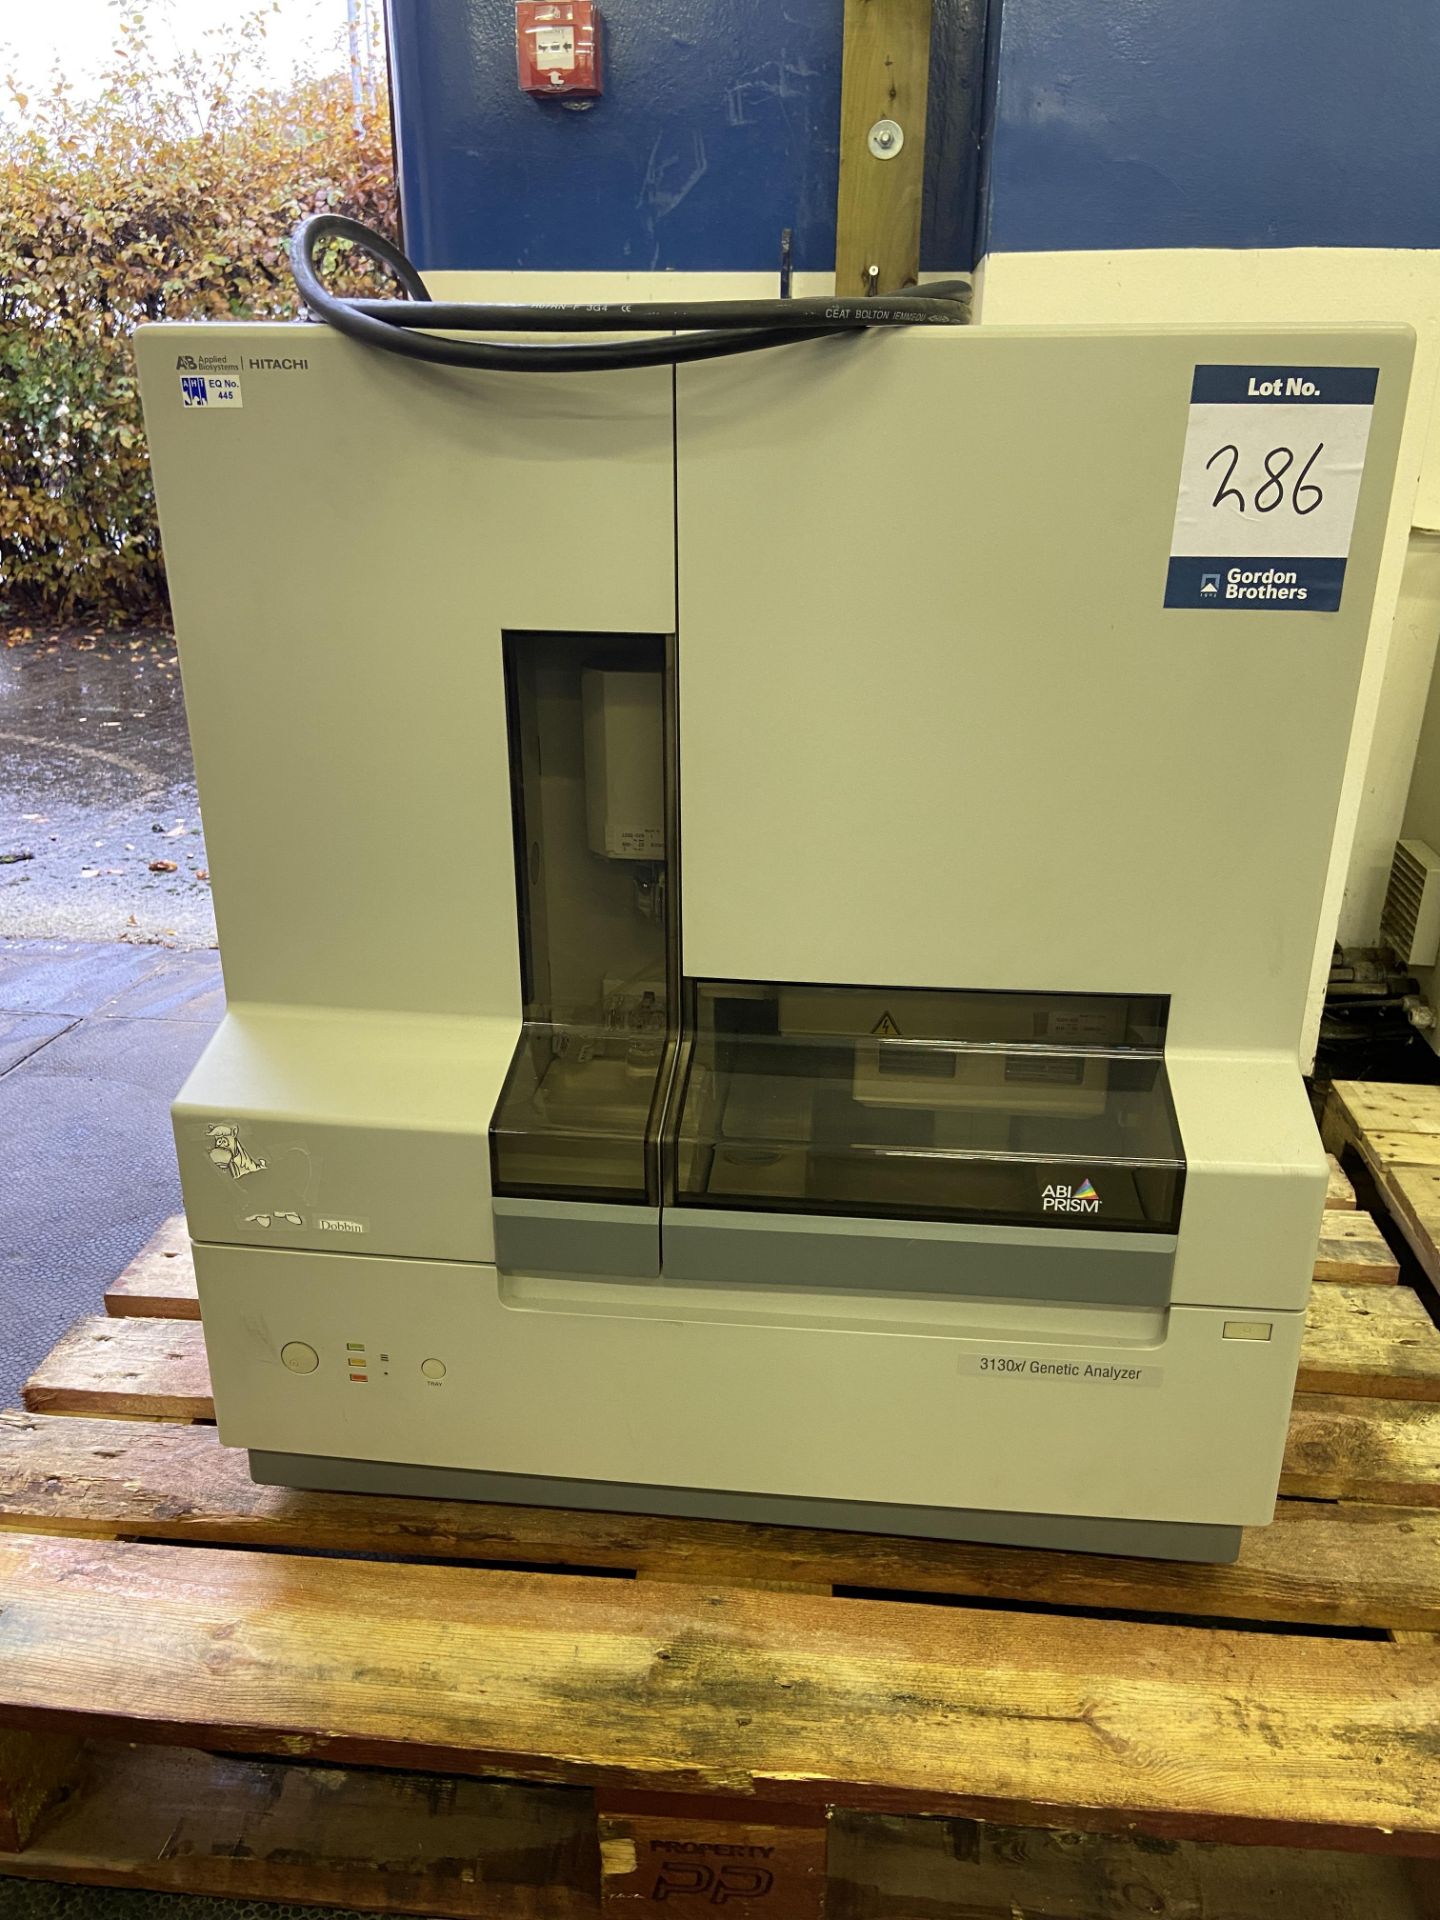 Applied Biosystems / Hitachi 3130XL genetic analyser, Serial No. 1350-024 (2001), with 30A 3 pin